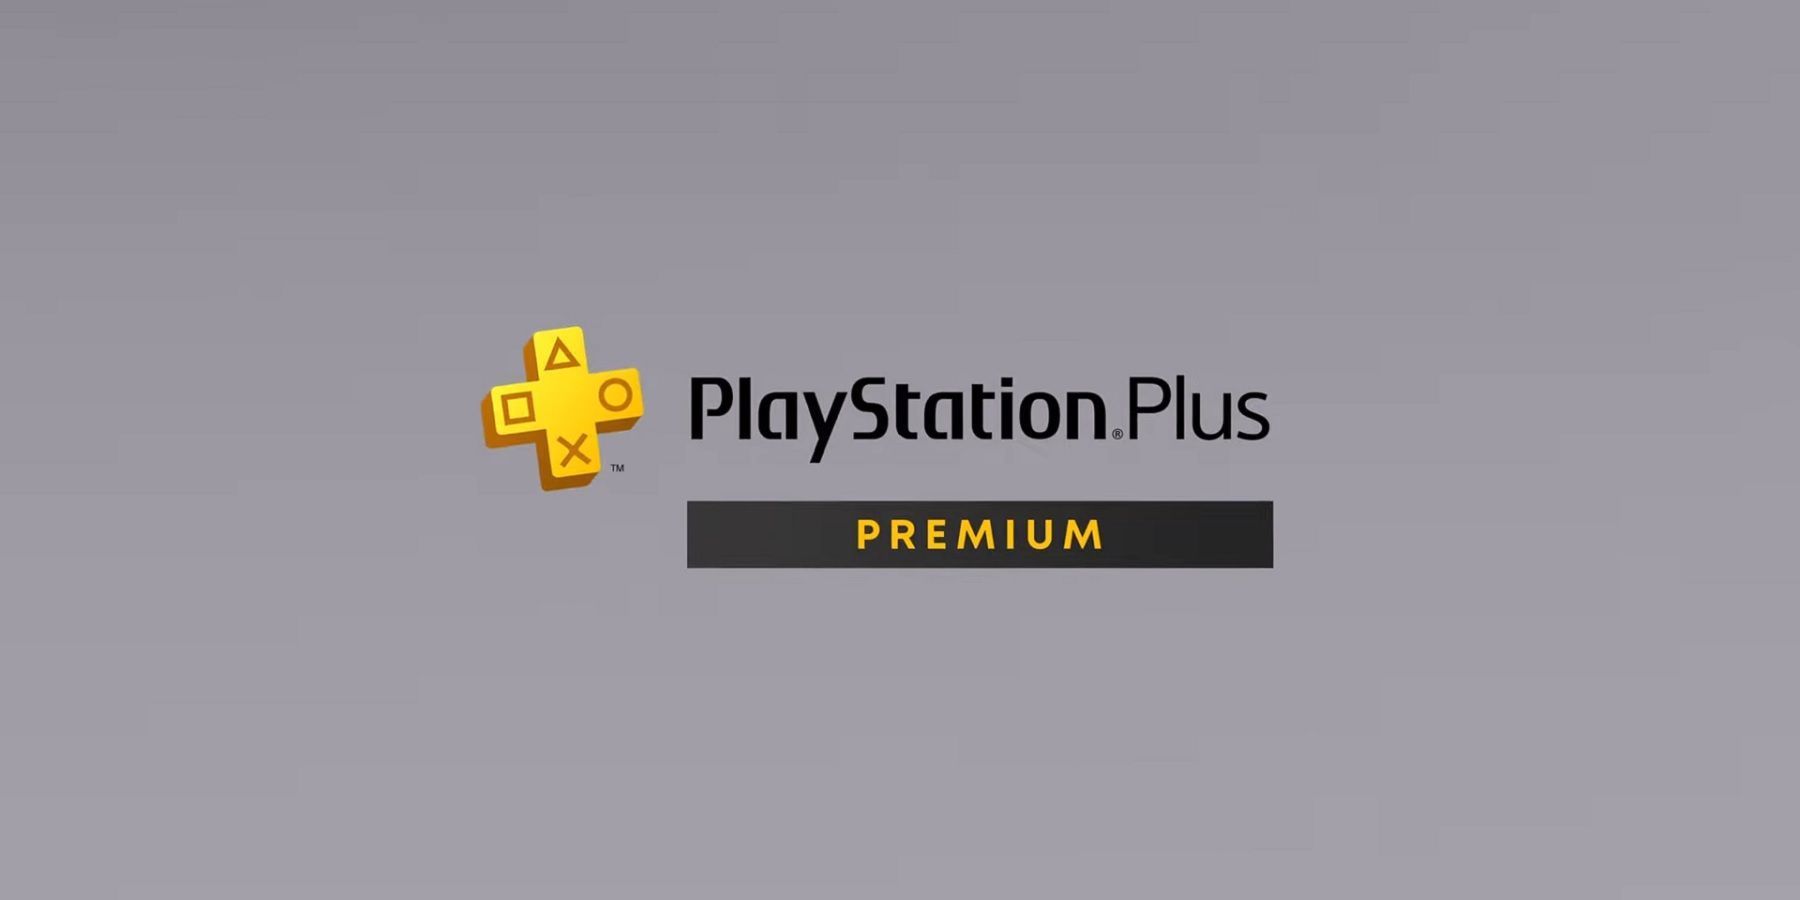 PS Plus Premium On PC: Specs & Requirements For Streaming